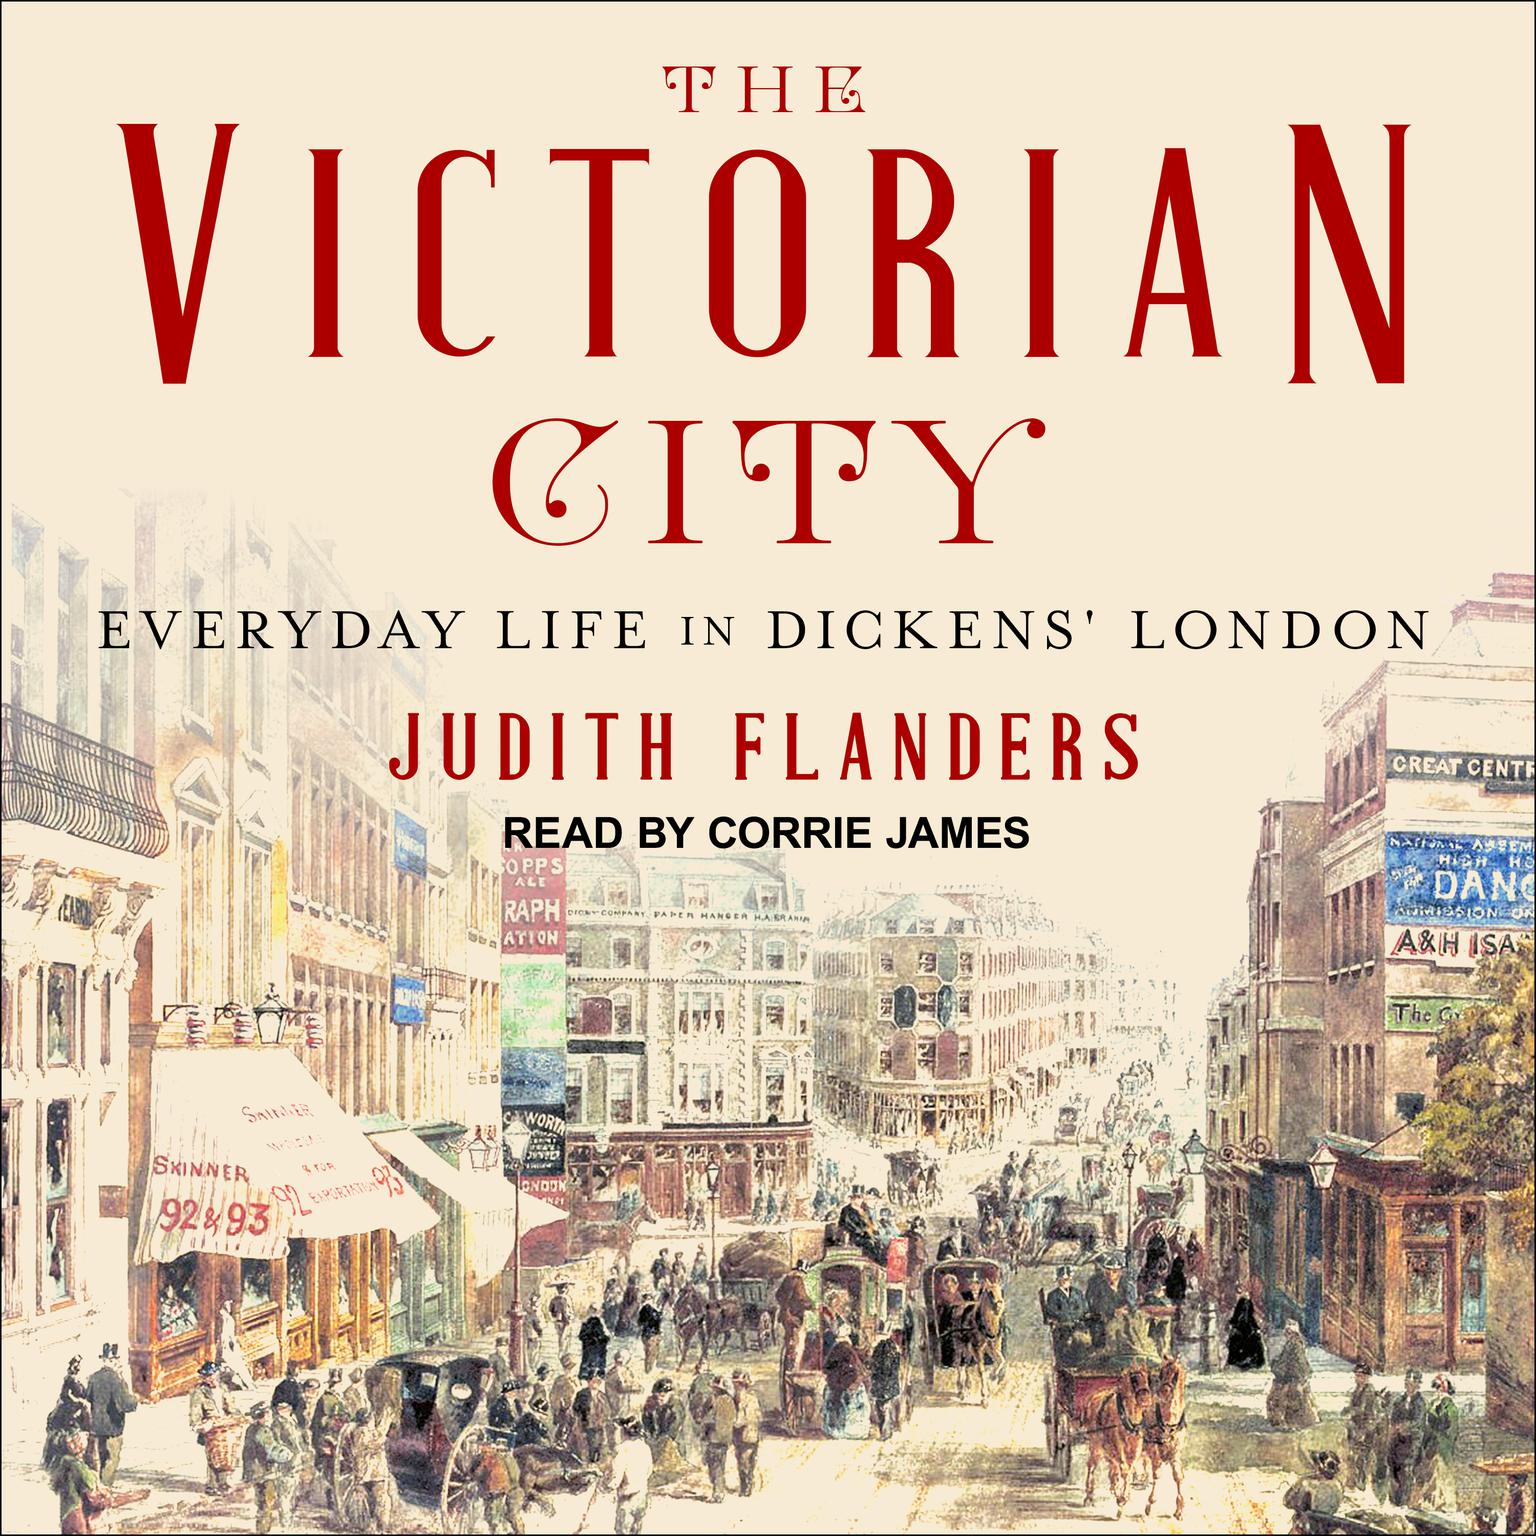 The Victorian City: Everyday Life in Dickens London Audiobook, by Judith Flanders